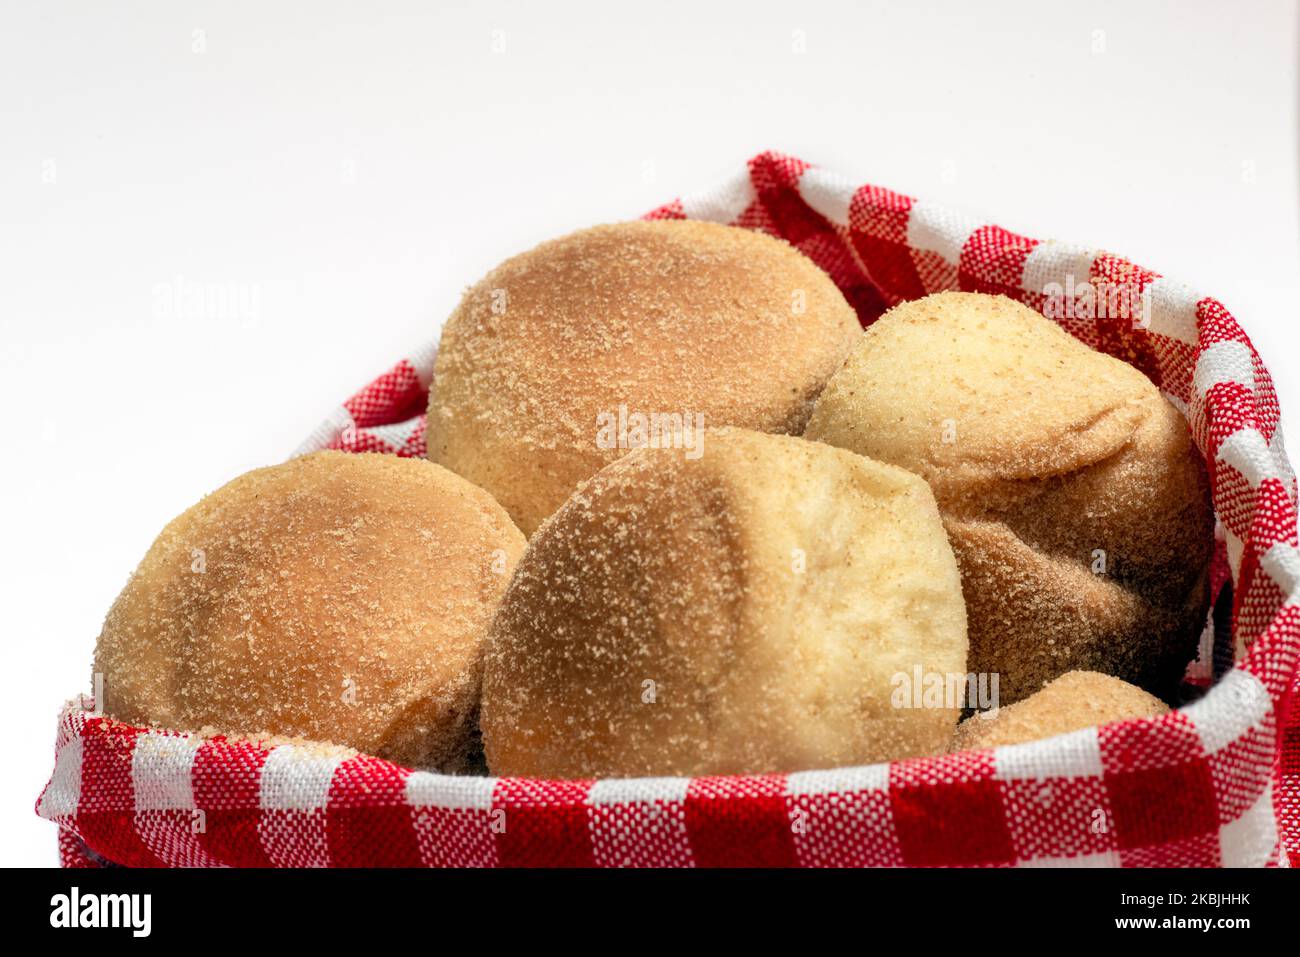 Pandesal or pan de sal is a Filipino traditional bread usually eaten during breakfast or afternoon snack. with copyspace for texts Stock Photo